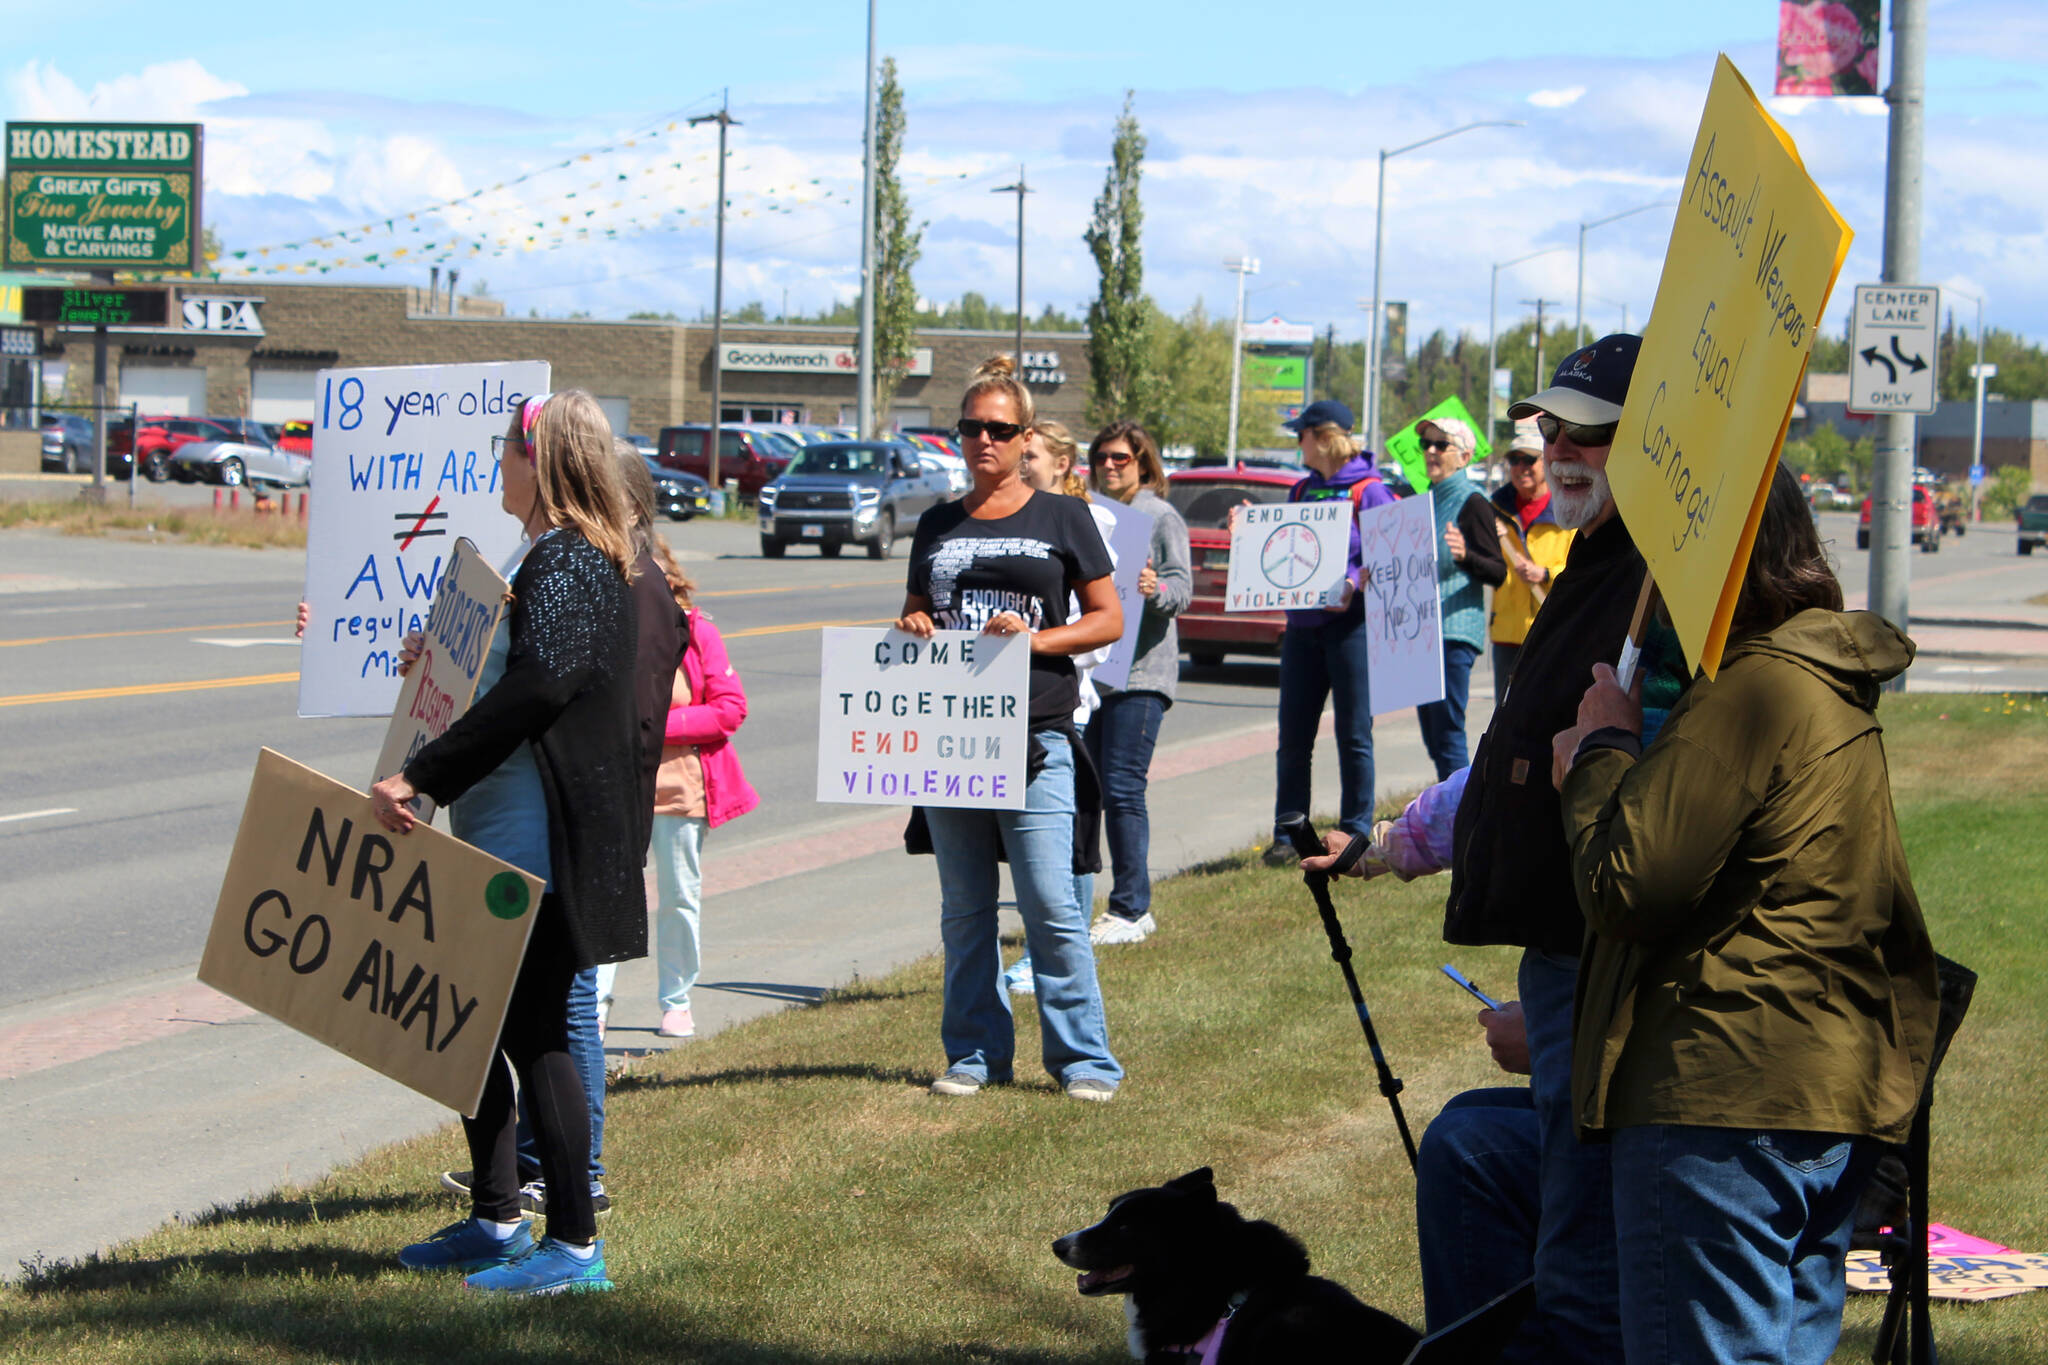 People hold signs during a demonstration opposing gun violence on Saturday, June 11, 2022, in Soldotna, Alaska. The local protest was part of a nationwide call to action issued by the nonprofit organization March for Our Lives, which was formed after a 2018 school shooting in Parkland, Florida, and aims to end gun violence. (Ashlyn O’Hara/Peninsula Clarion)
People hold signs during a demonstration opposing gun violence on Saturday, June 11, 2022 in Soldotna, Alaska. The local protest was part of a nationwide call to action issued by the nonprofit organization March for Our Lives, which was formed after a 2018 school shooting in Parkland, Florida and aims to end gun violence. (Ashlyn O’Hara/Peninsula Clarion)